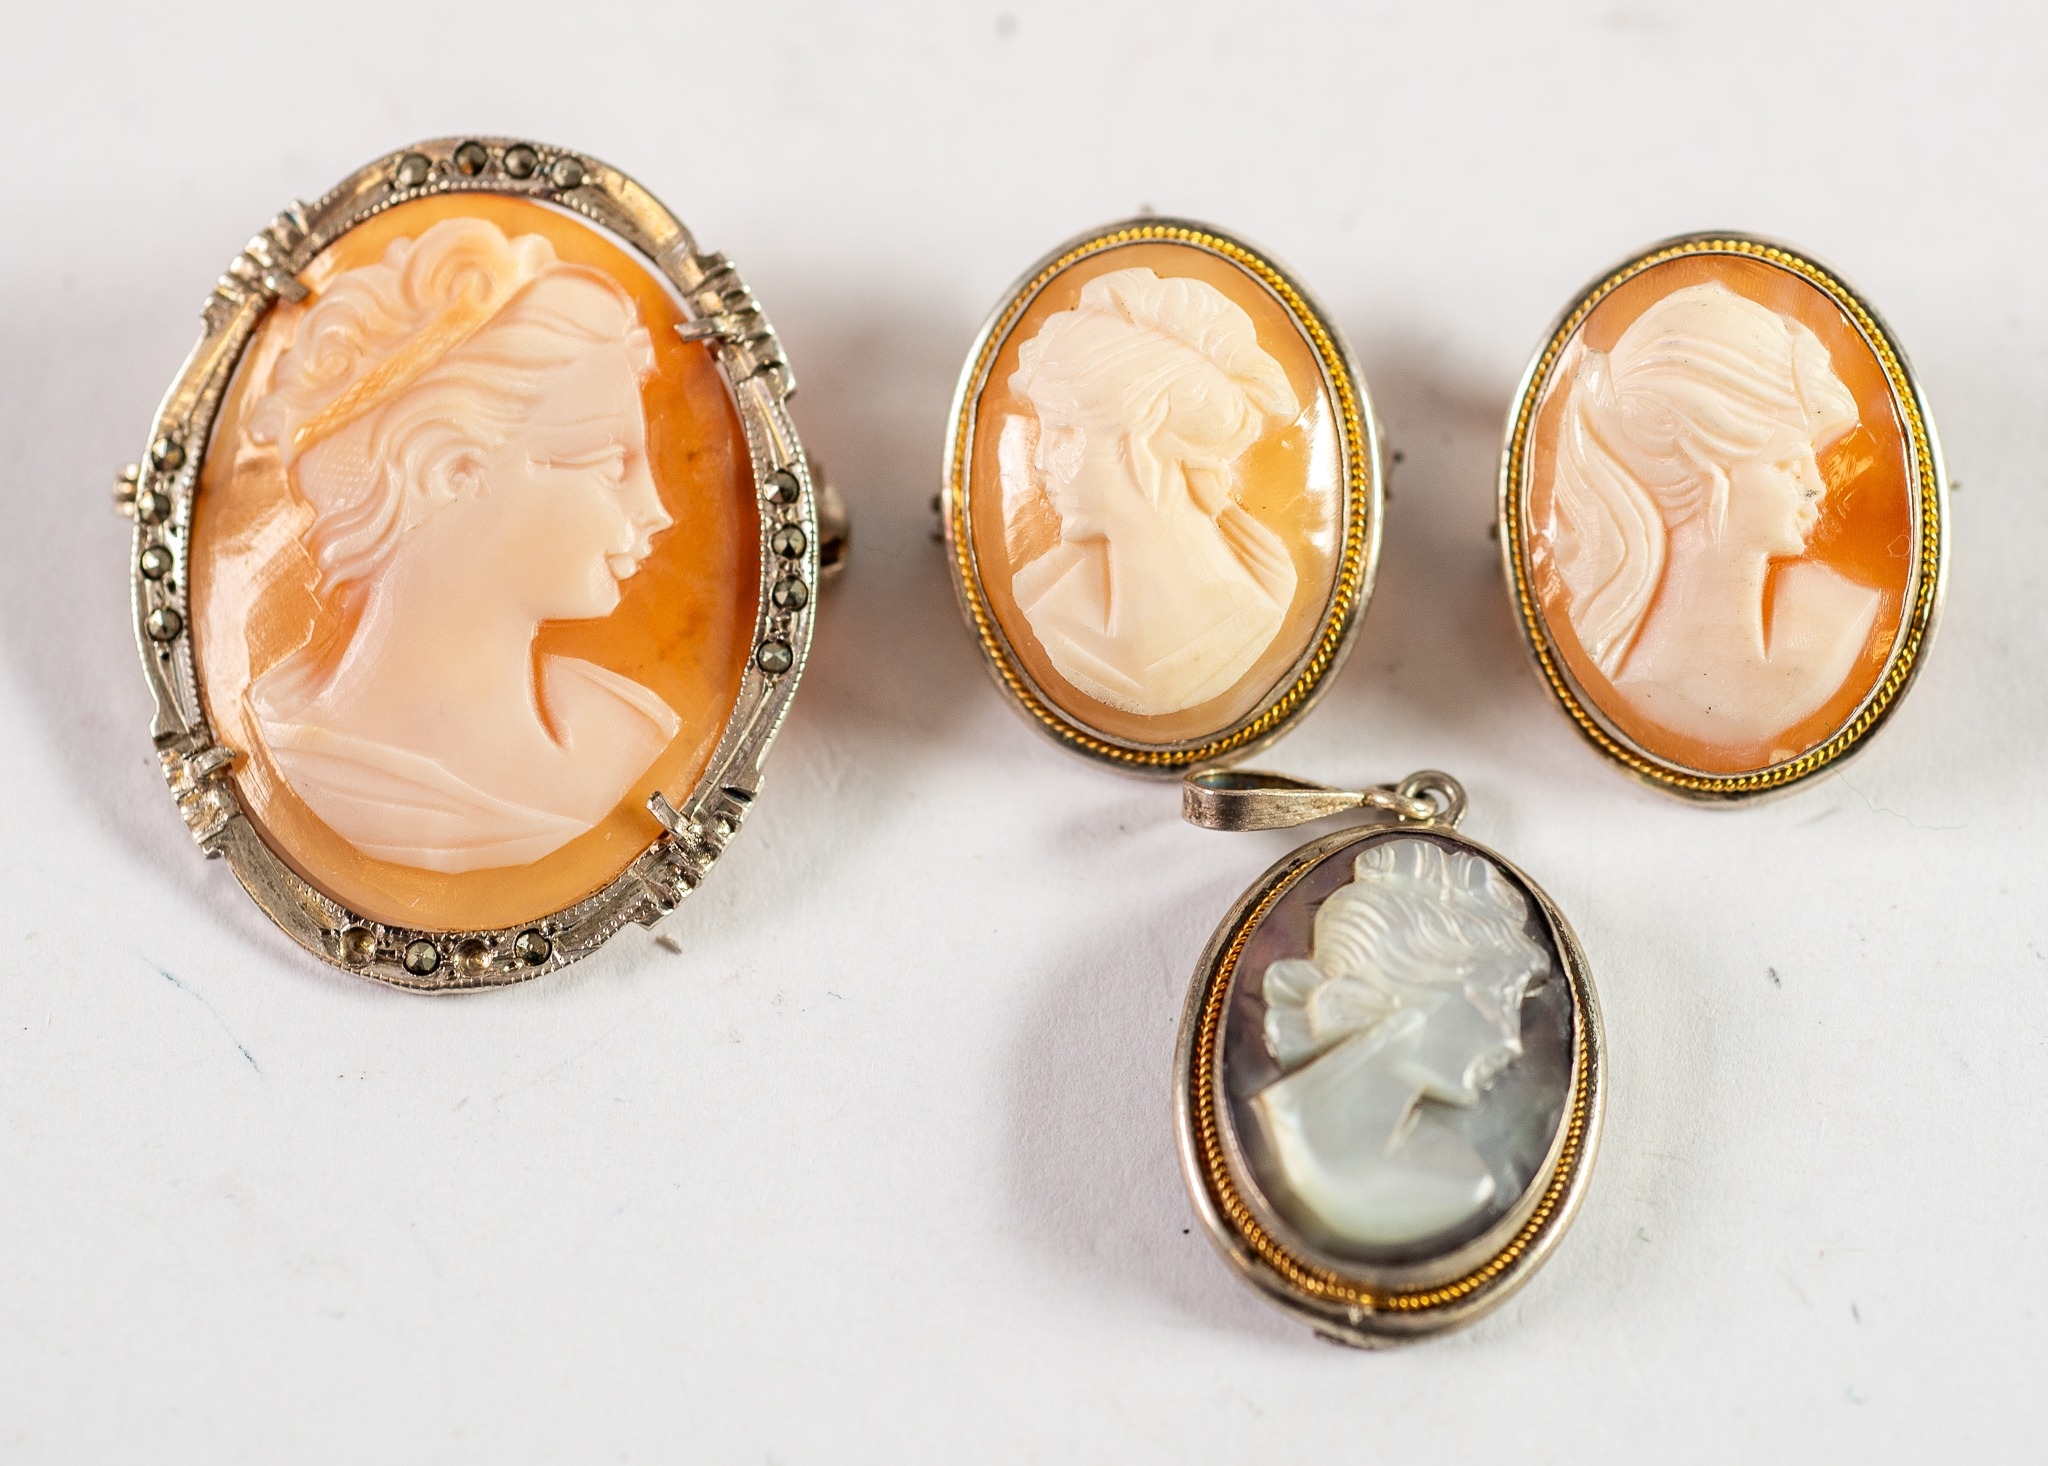 THREE CONTINENTAL SHELL CARVED CAMEO BROOCH PENDANTS and another carved mother of pearl CAMEO, in